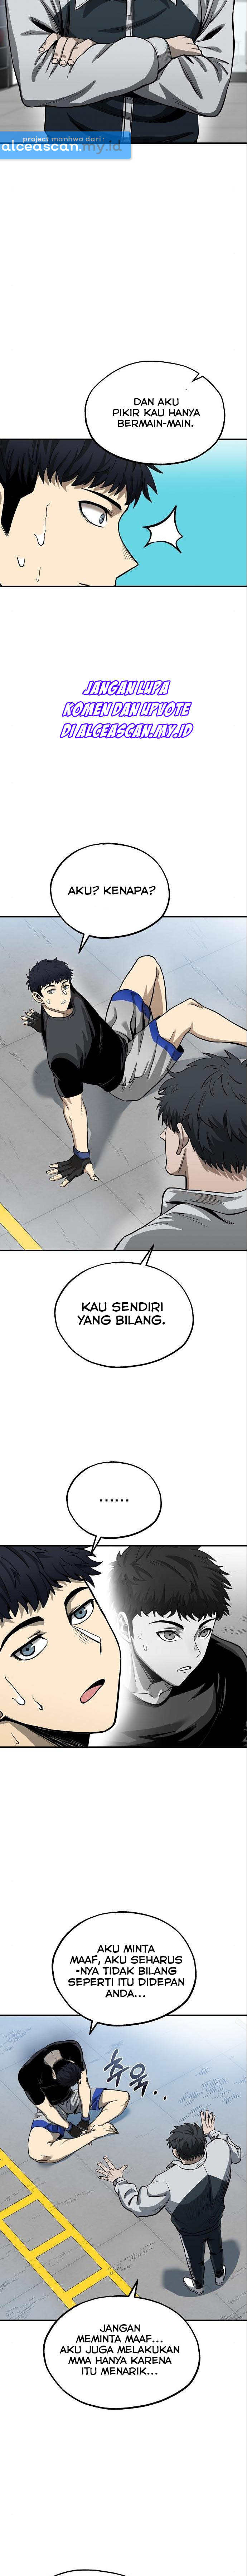 King Mma Chapter 06 - 109